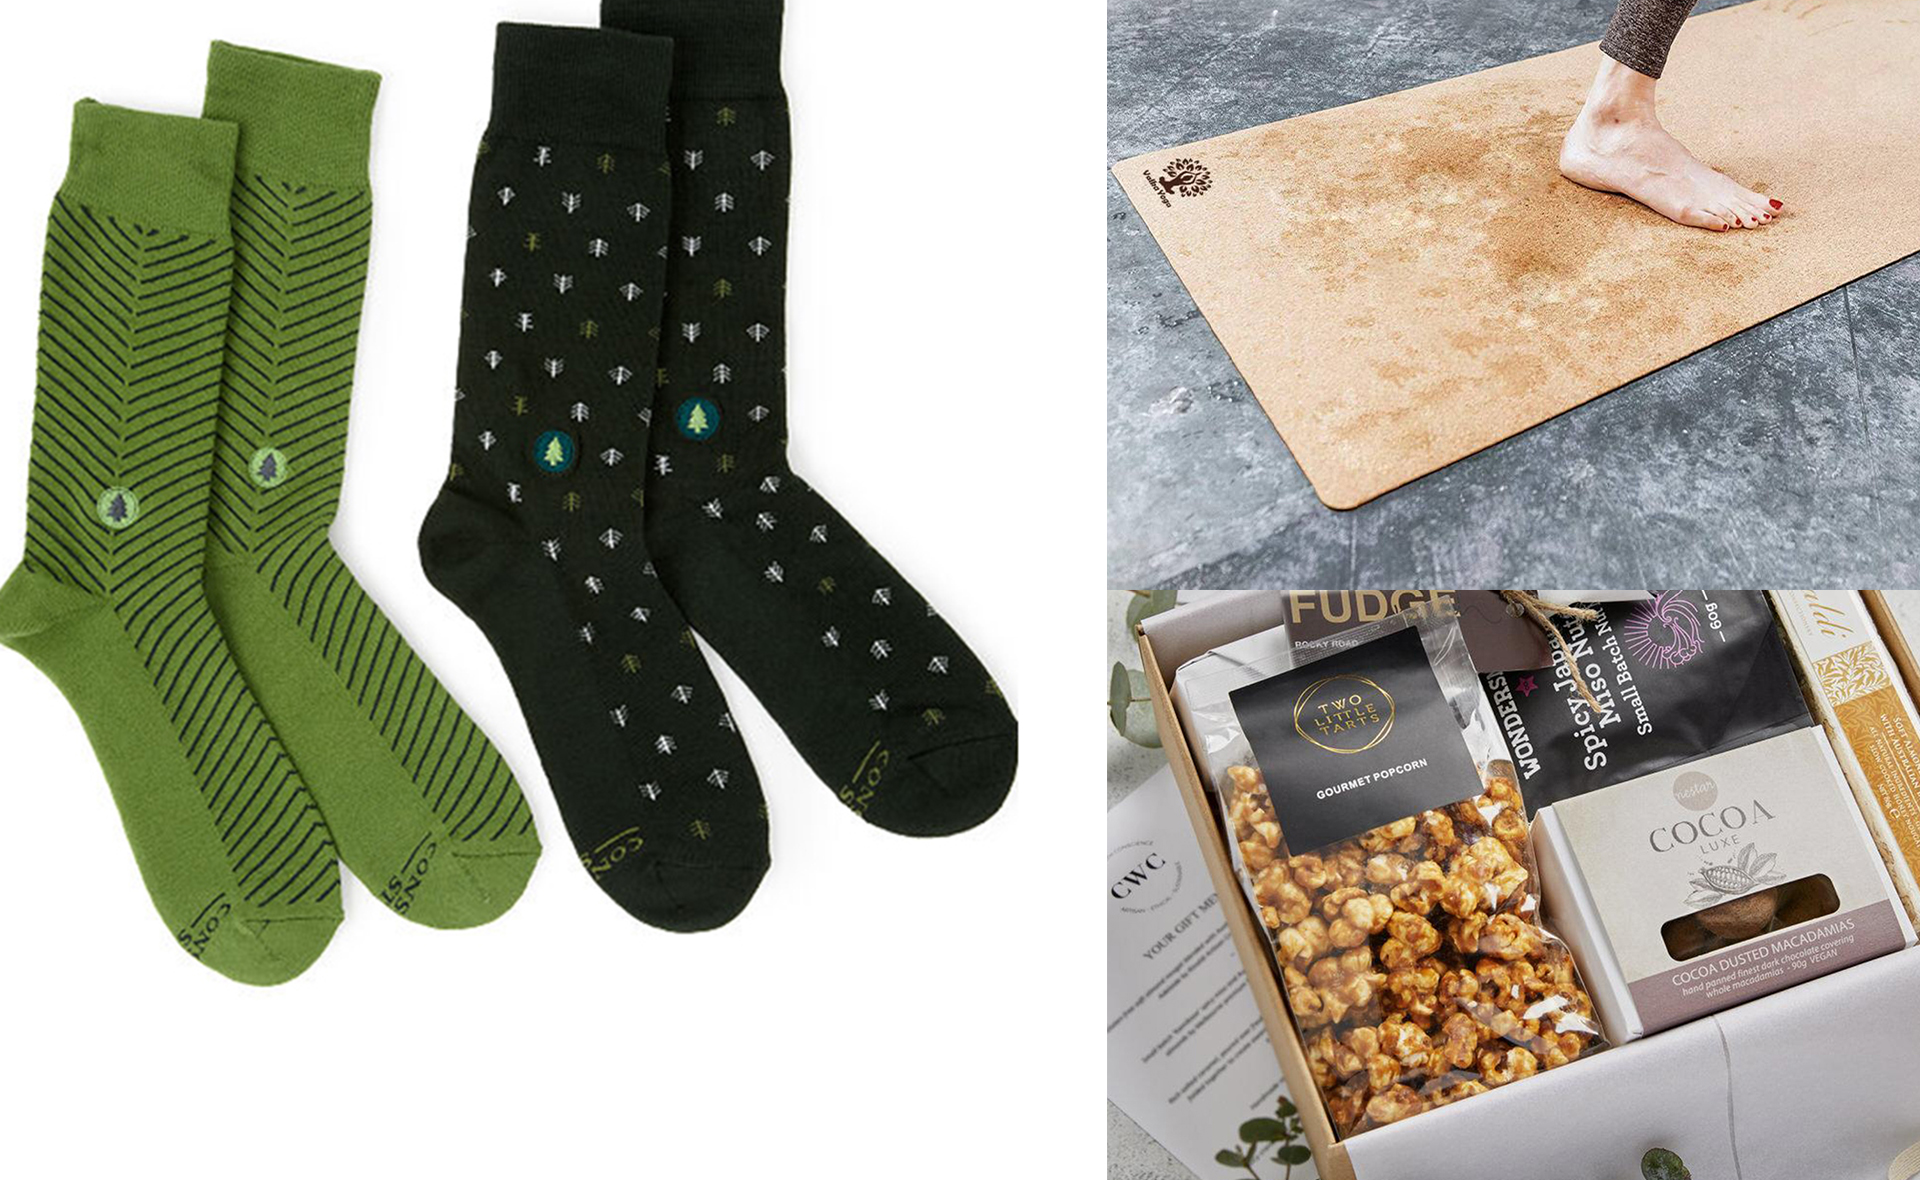 Eco-friendly Christmas gifts that won’t cost the planet or your bank account